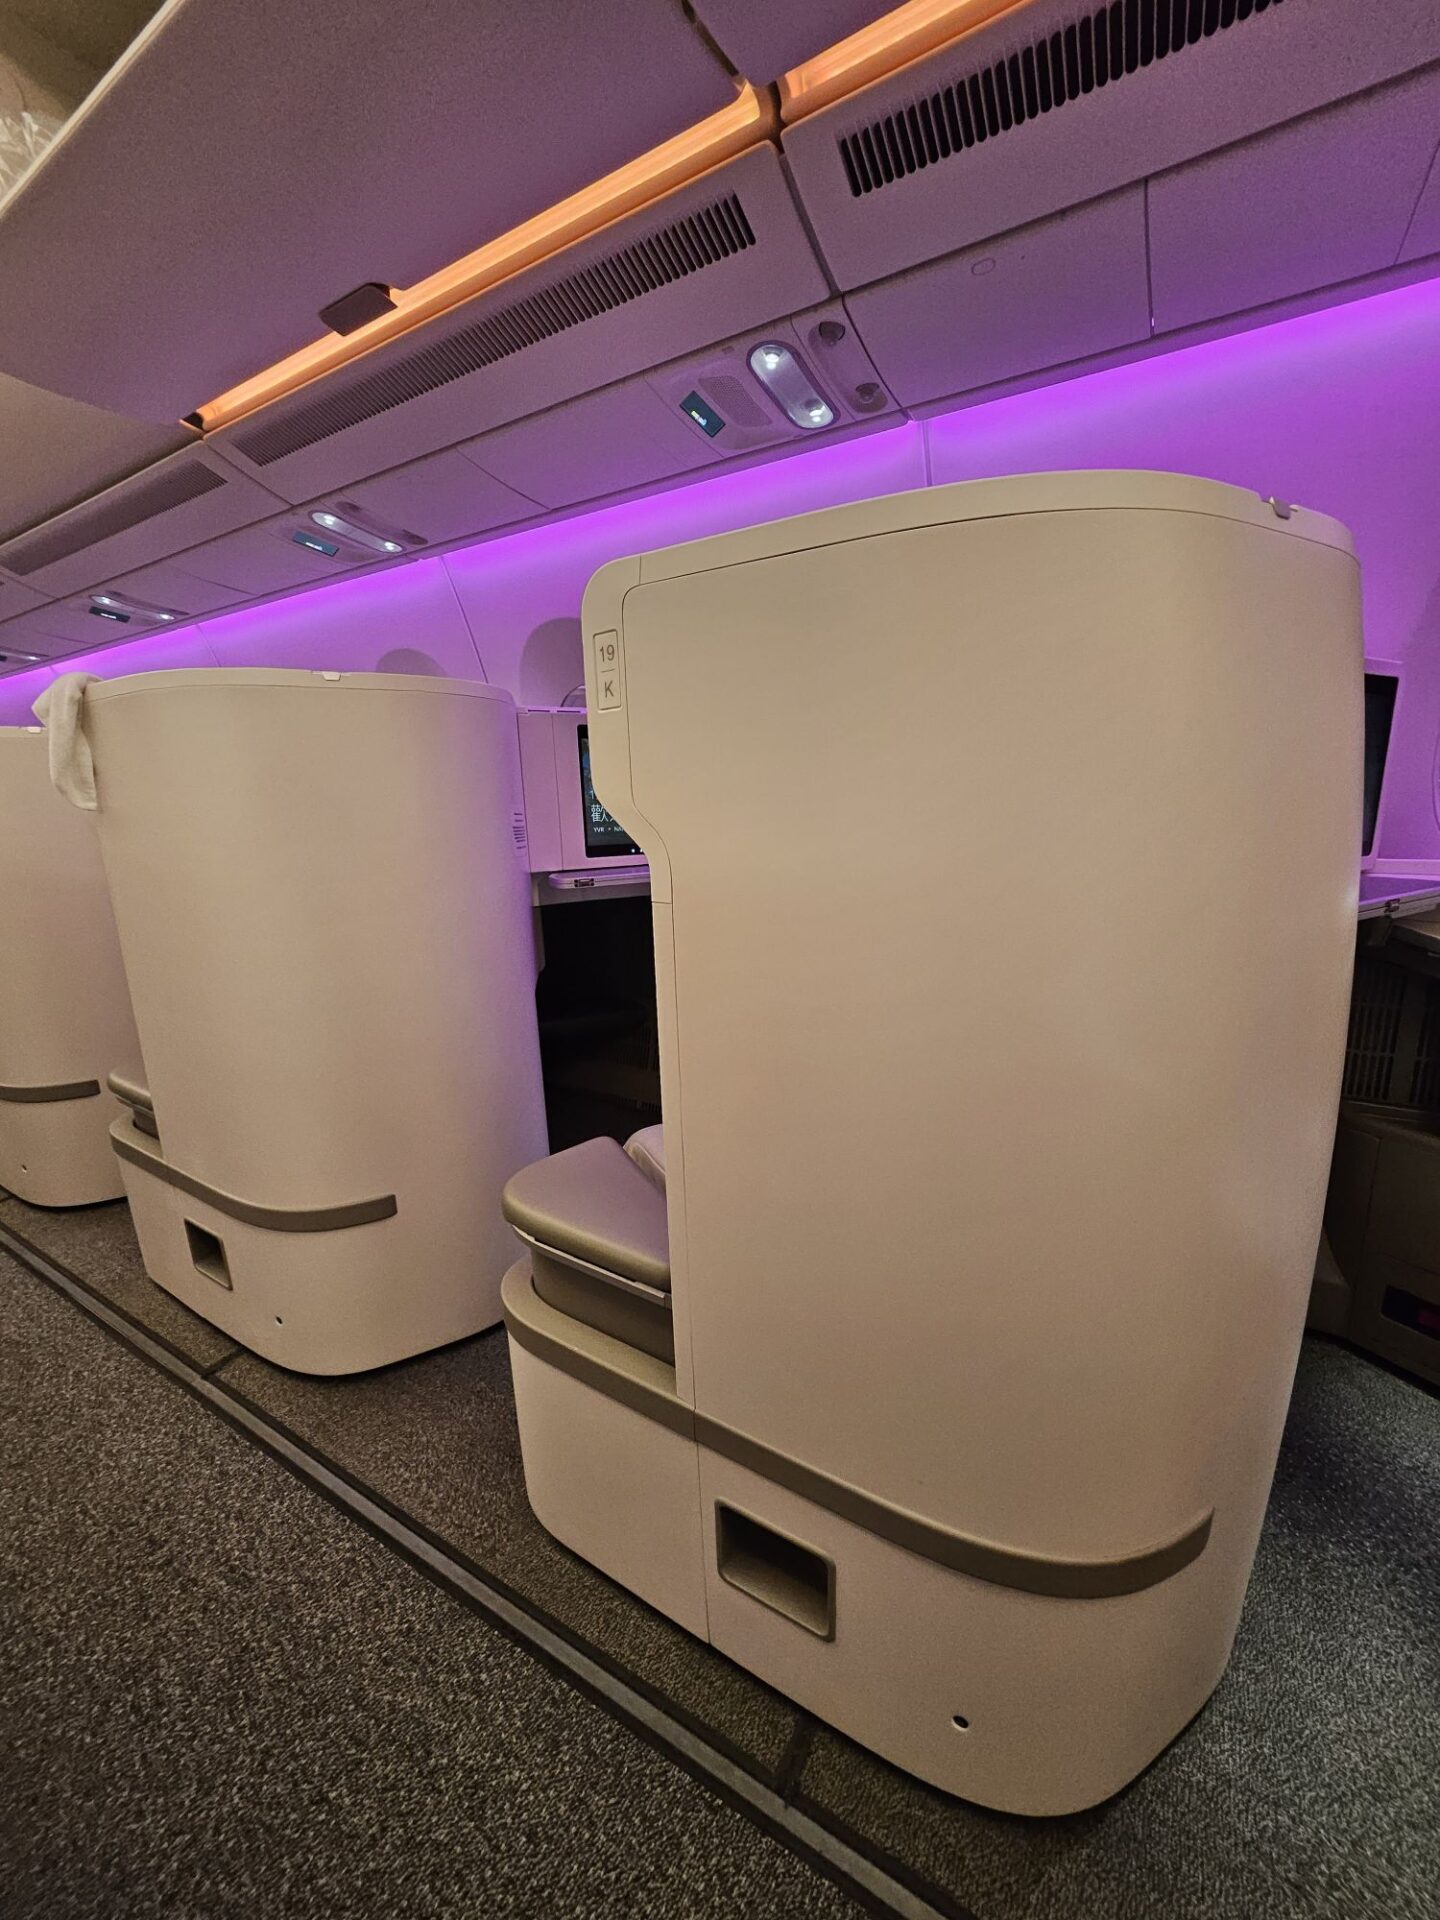 a row of white chairs in a room with purple lighting